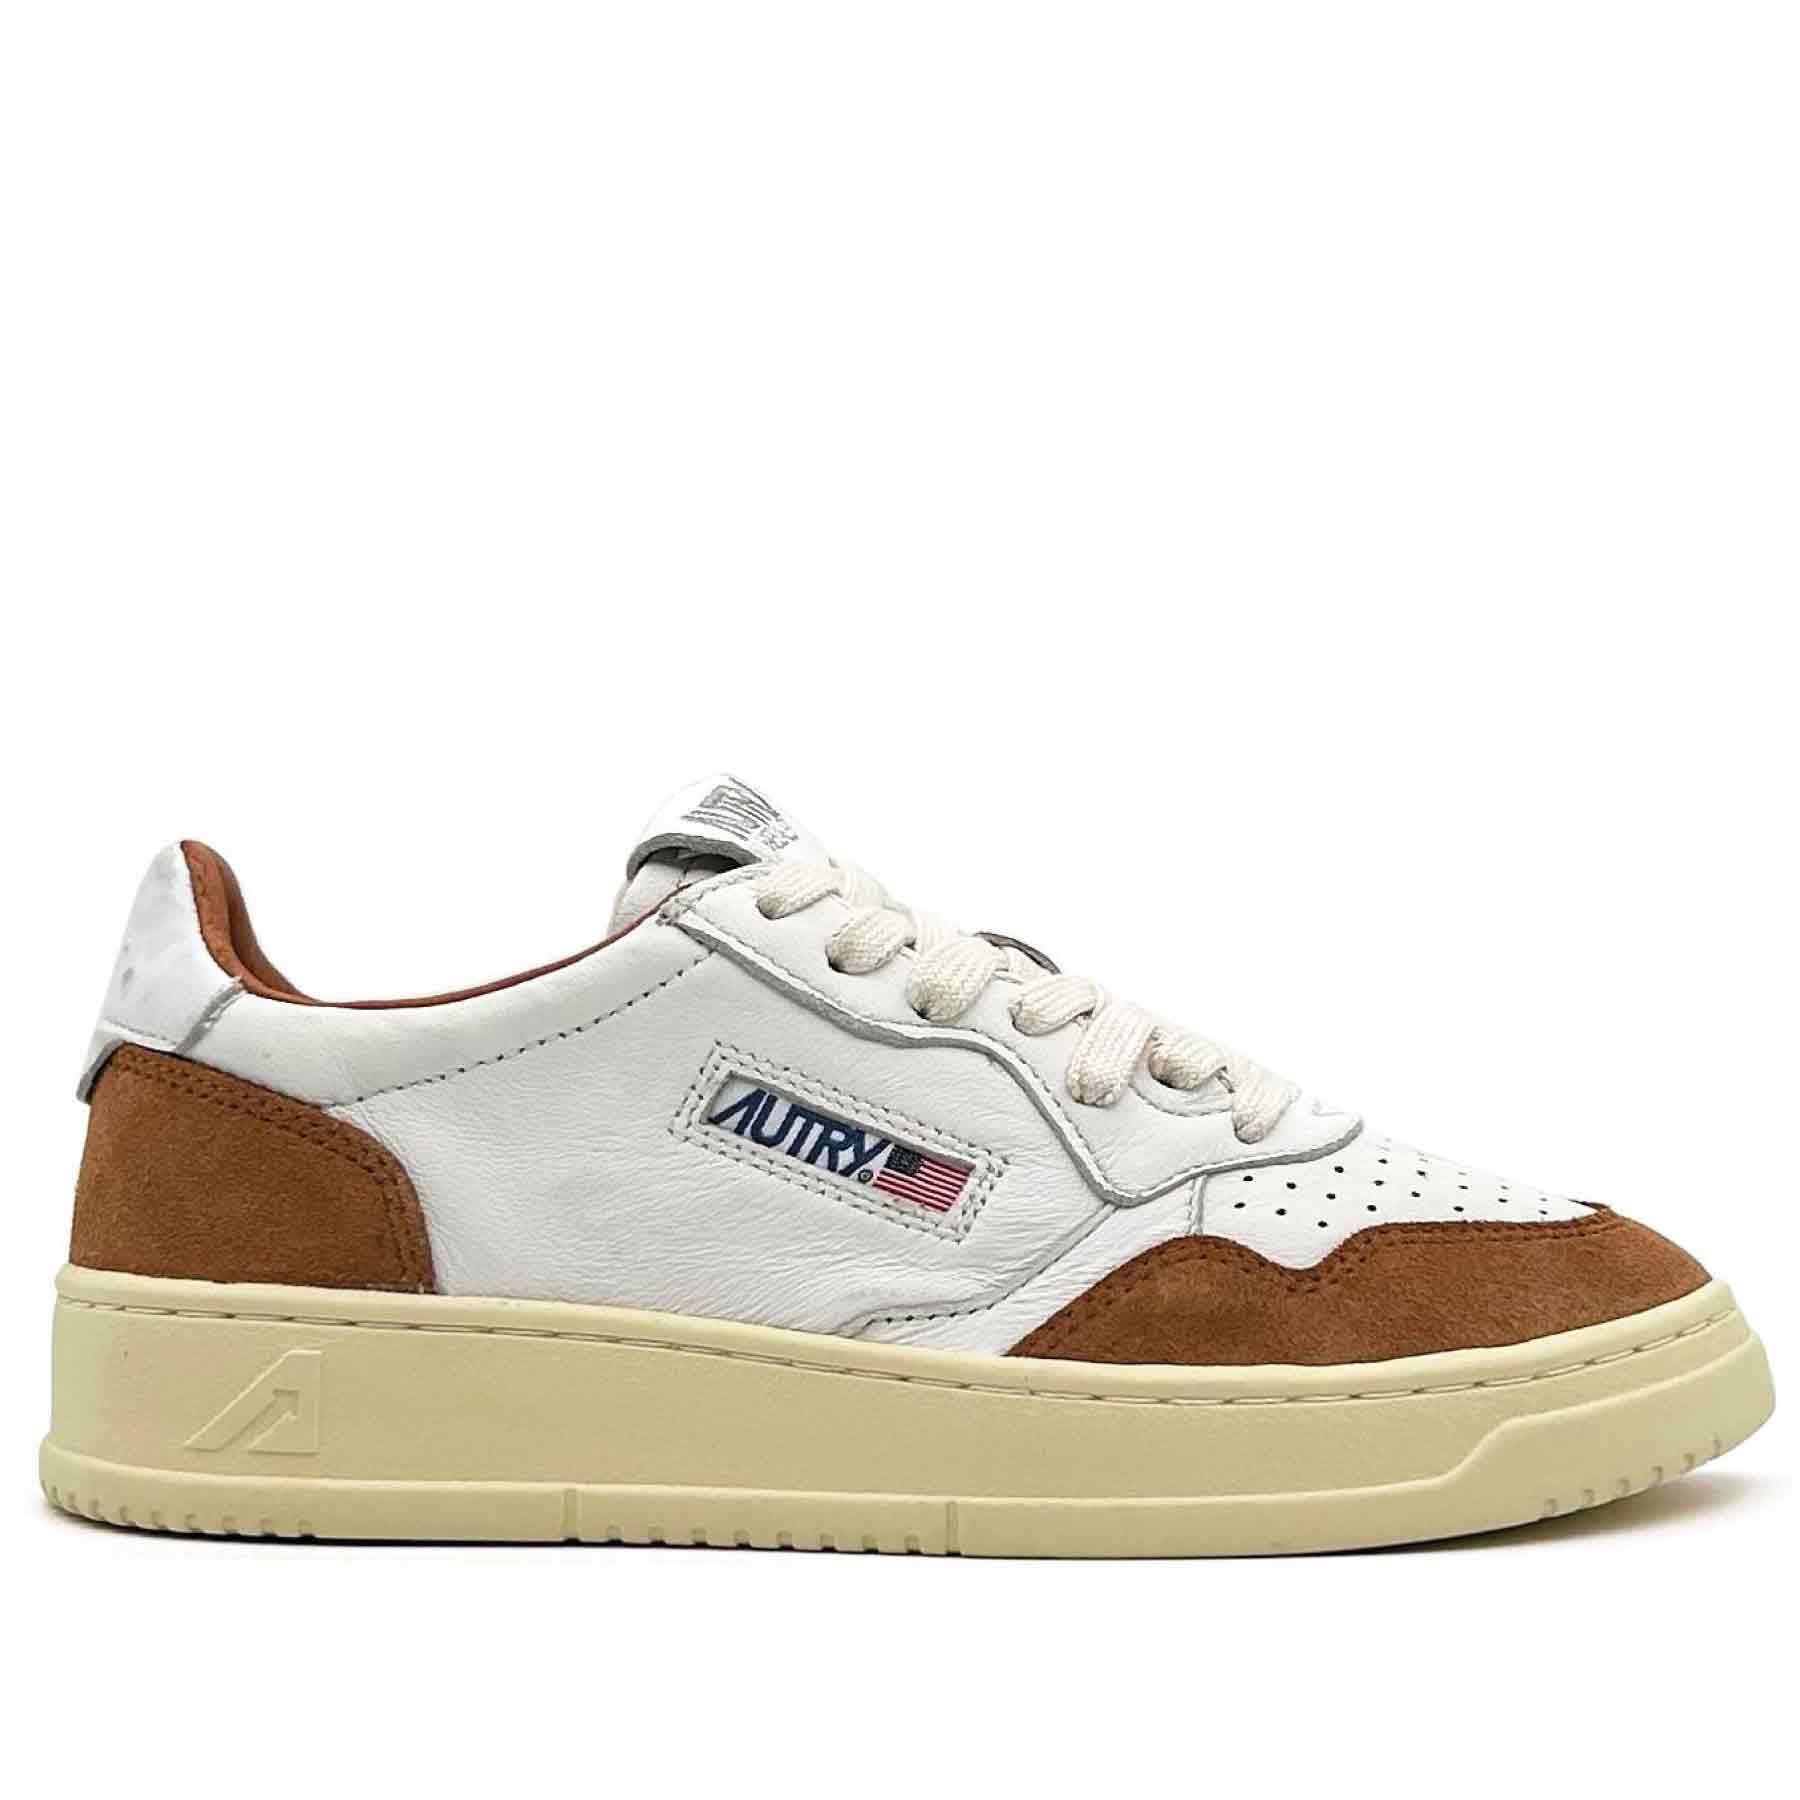 Medalist Low Women White Goat Leather Caramel Suede